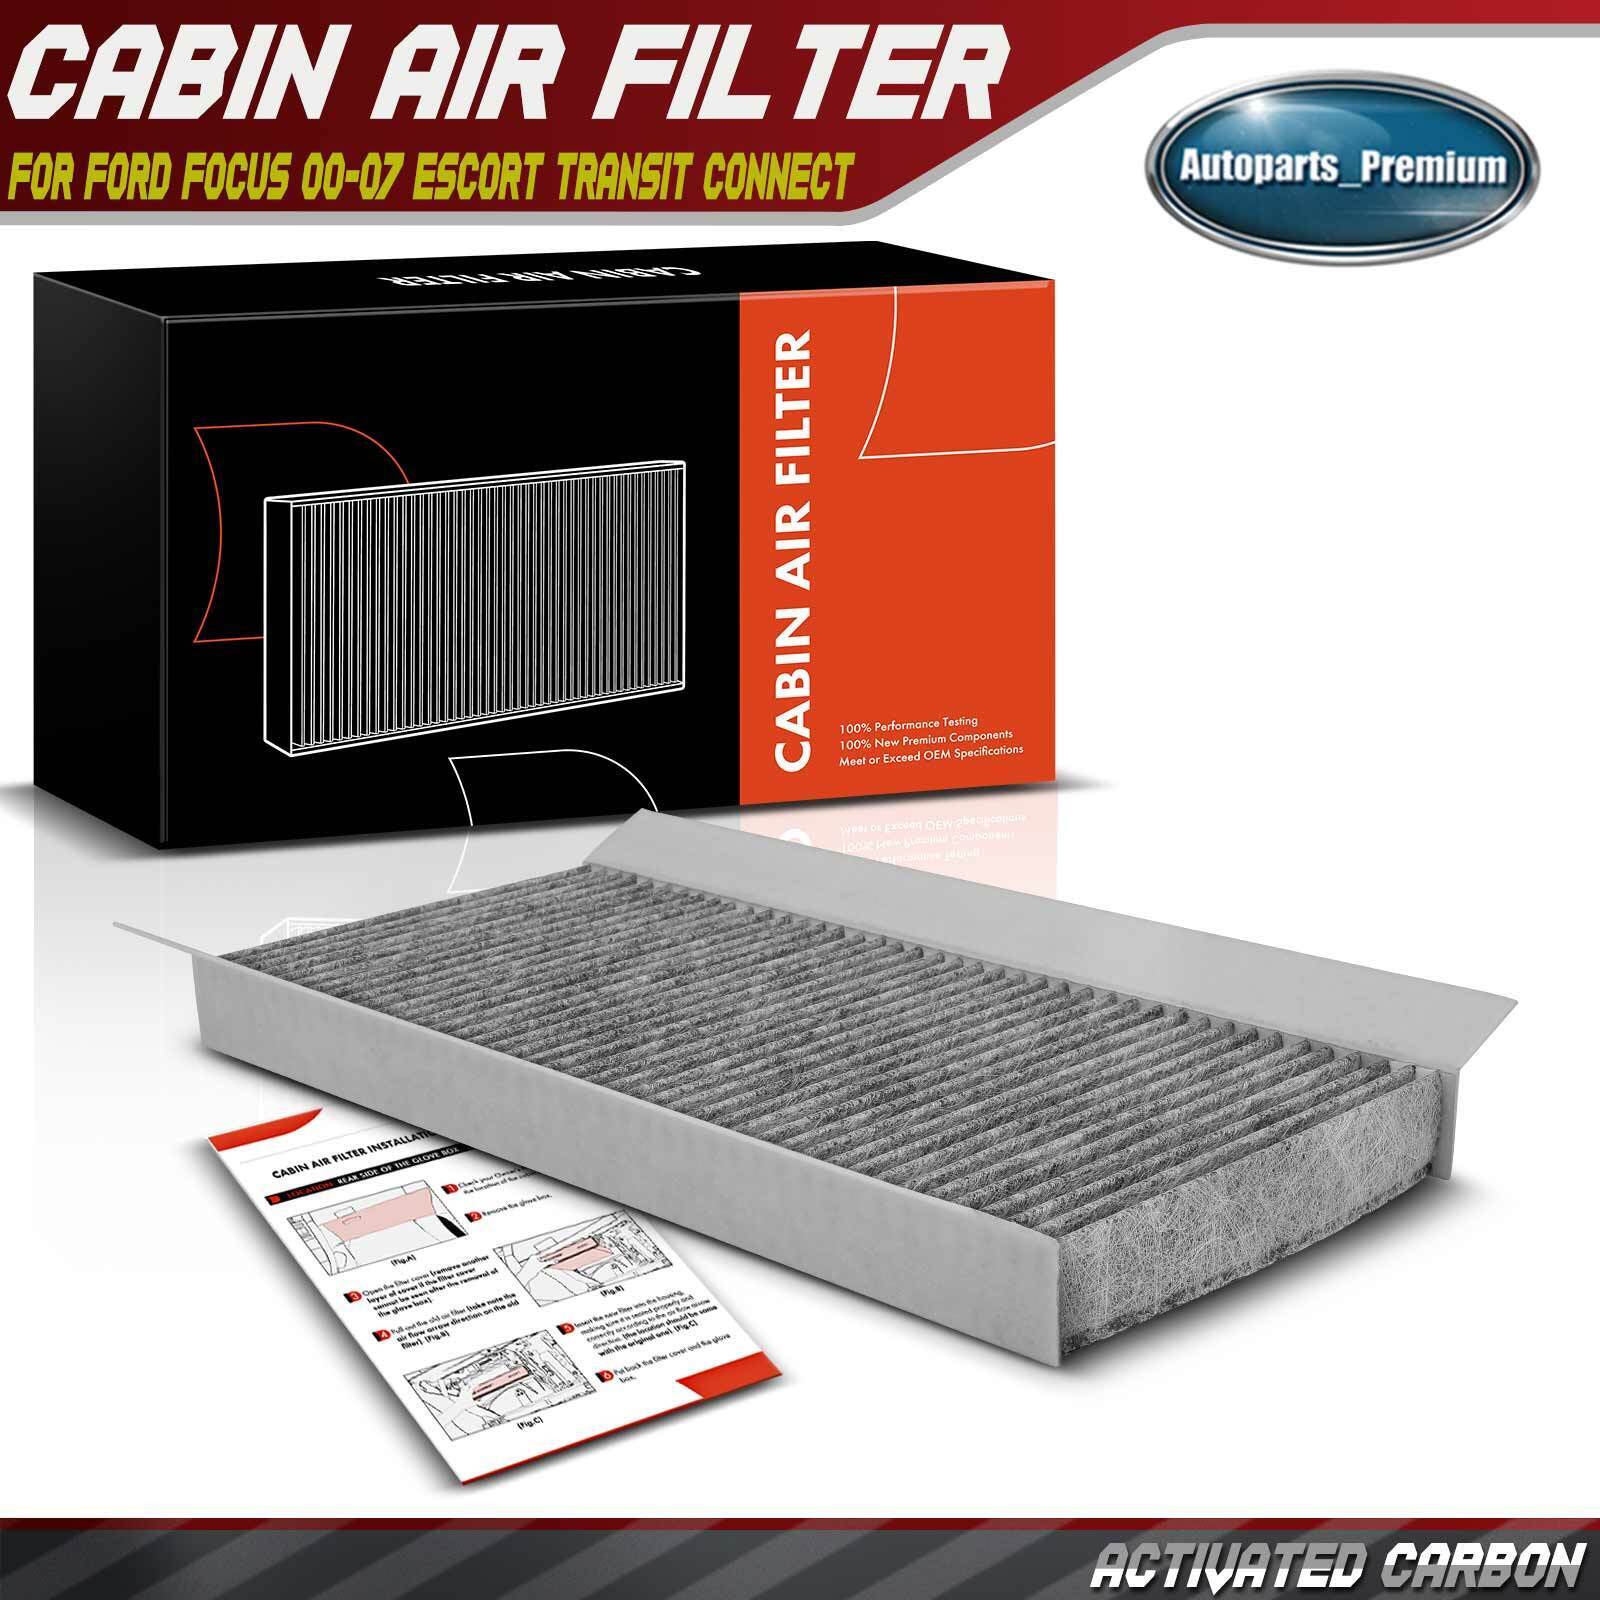 Activated Carbon Cabin Air Filter for Ford Focus 00-07 Escort Transit Connect